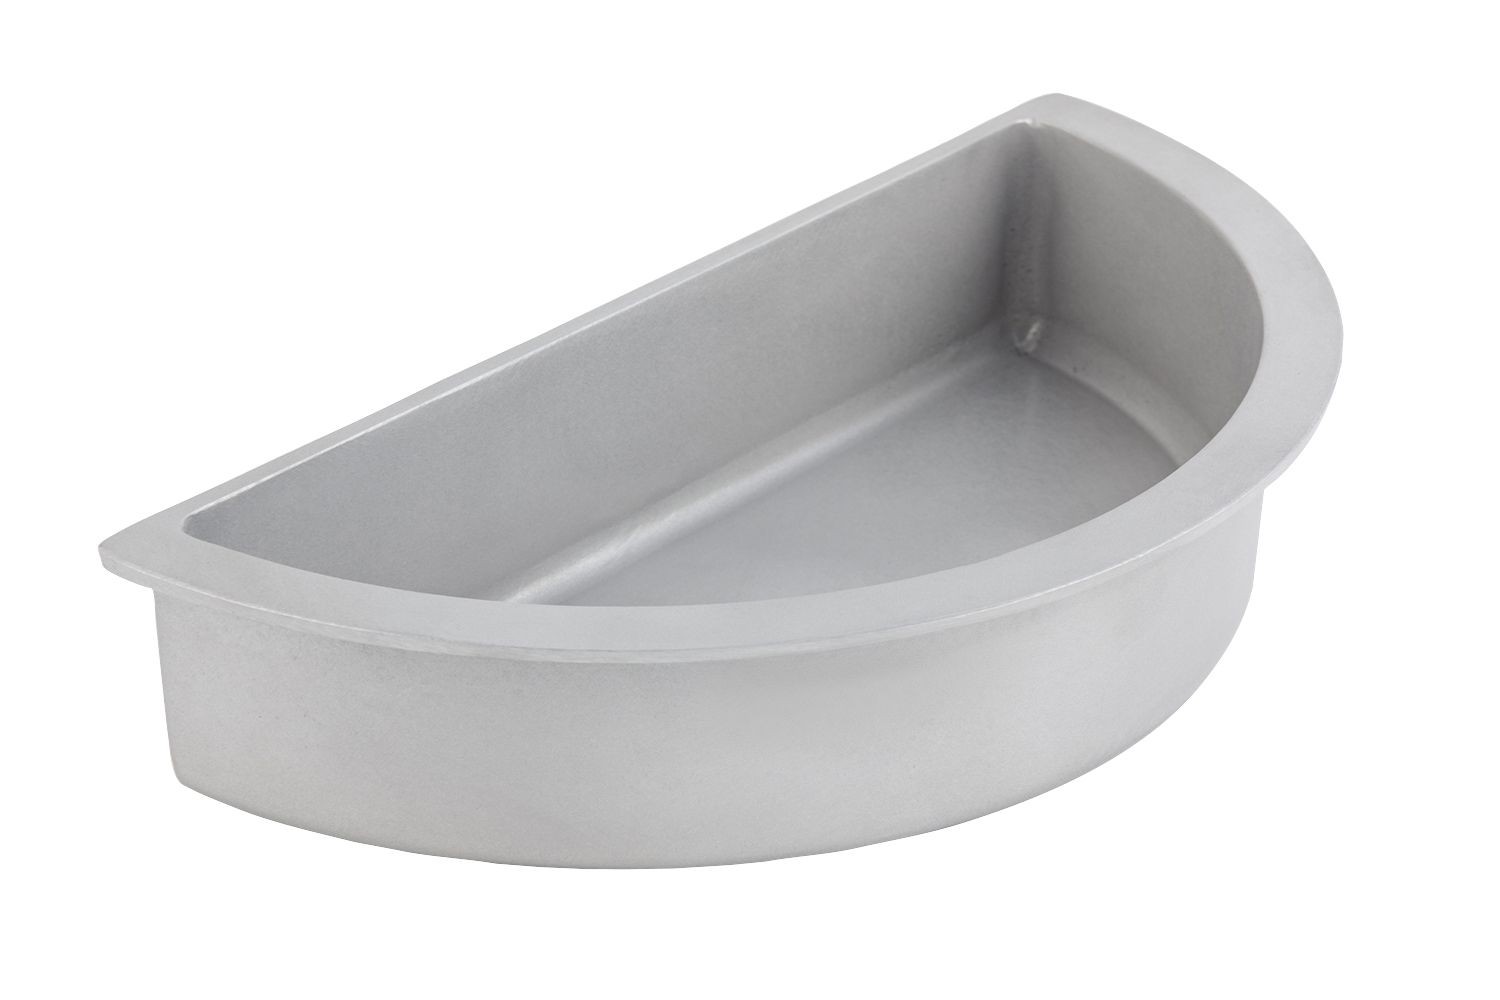 Bon Chef 5073 1/2P Half-Size Chafer Food Pan, Pewter Glo 3 1/2 Qt., Set of 2